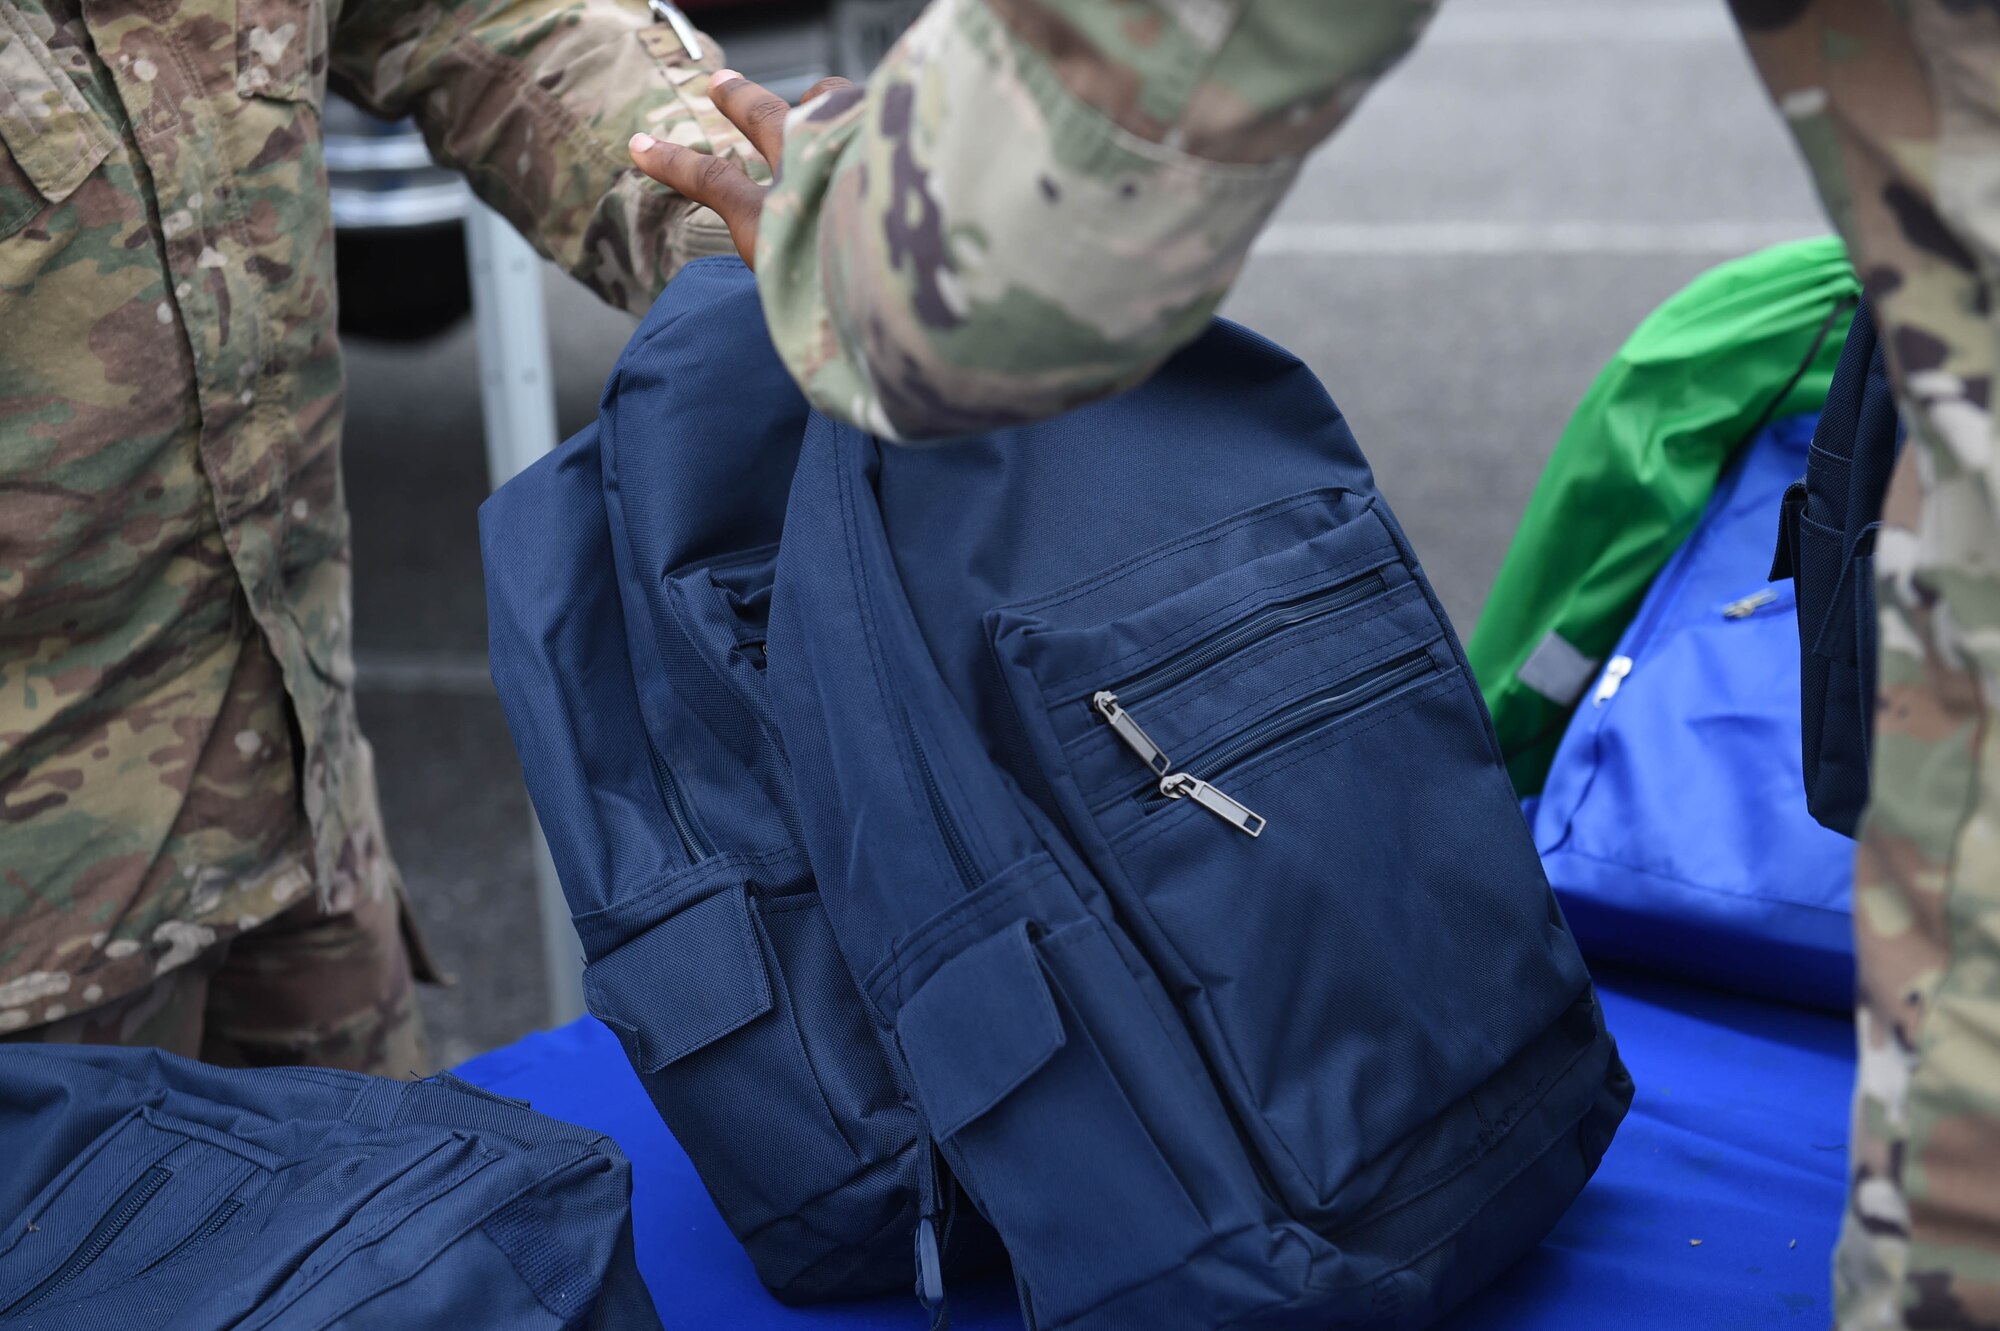 U.S. Air Force Airmen distribute backpacks with school supplies to service members during an event supporting Operation Homefront at Moody Air Force Base, Georgia, July 26, 2021. Operation Homefront is a non-profit organization whose mission is “to build strong, stable, and secure military families so they can thrive in the communities they have worked so hard to protect.” (U.S. Air Force photo by Senior Airman Rebeckah Medeiros)